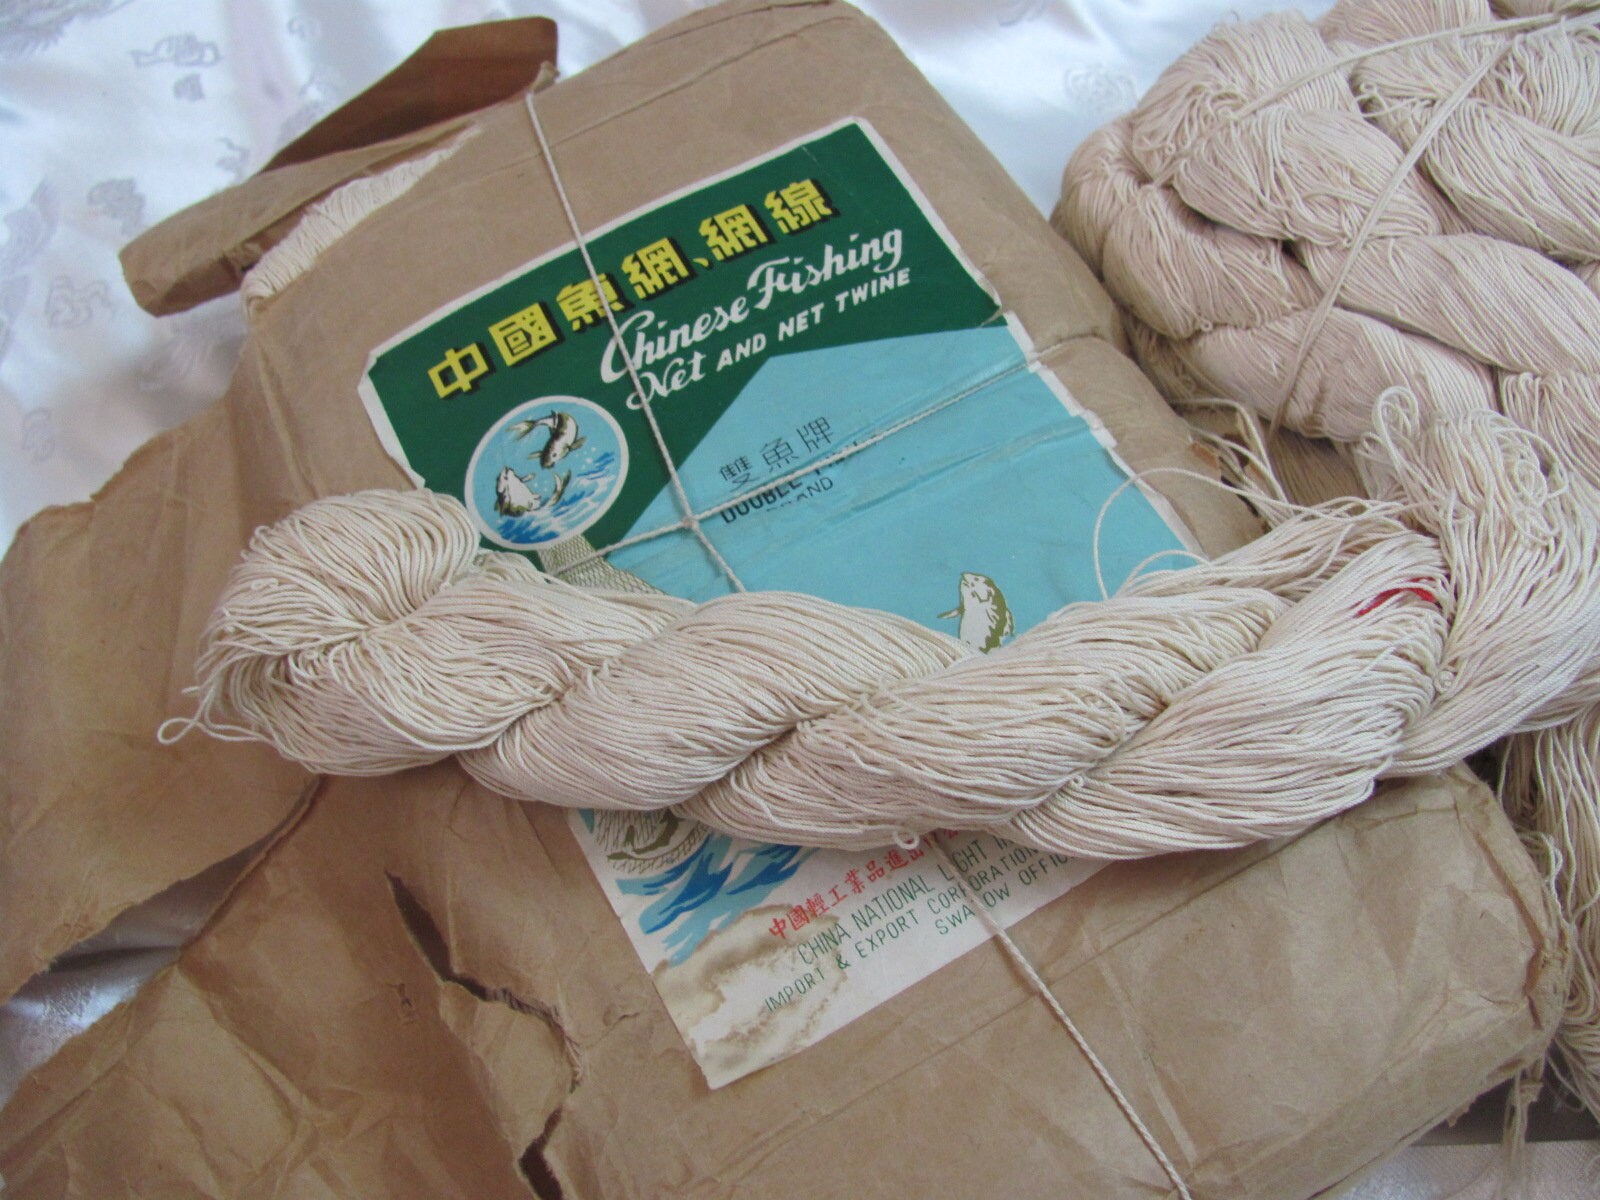 Vintage Chinese Fishing Net Twine Cord String Doily Making Macrame Weaving  Fiber Textile Art Price is per 2 Ounce Skein 